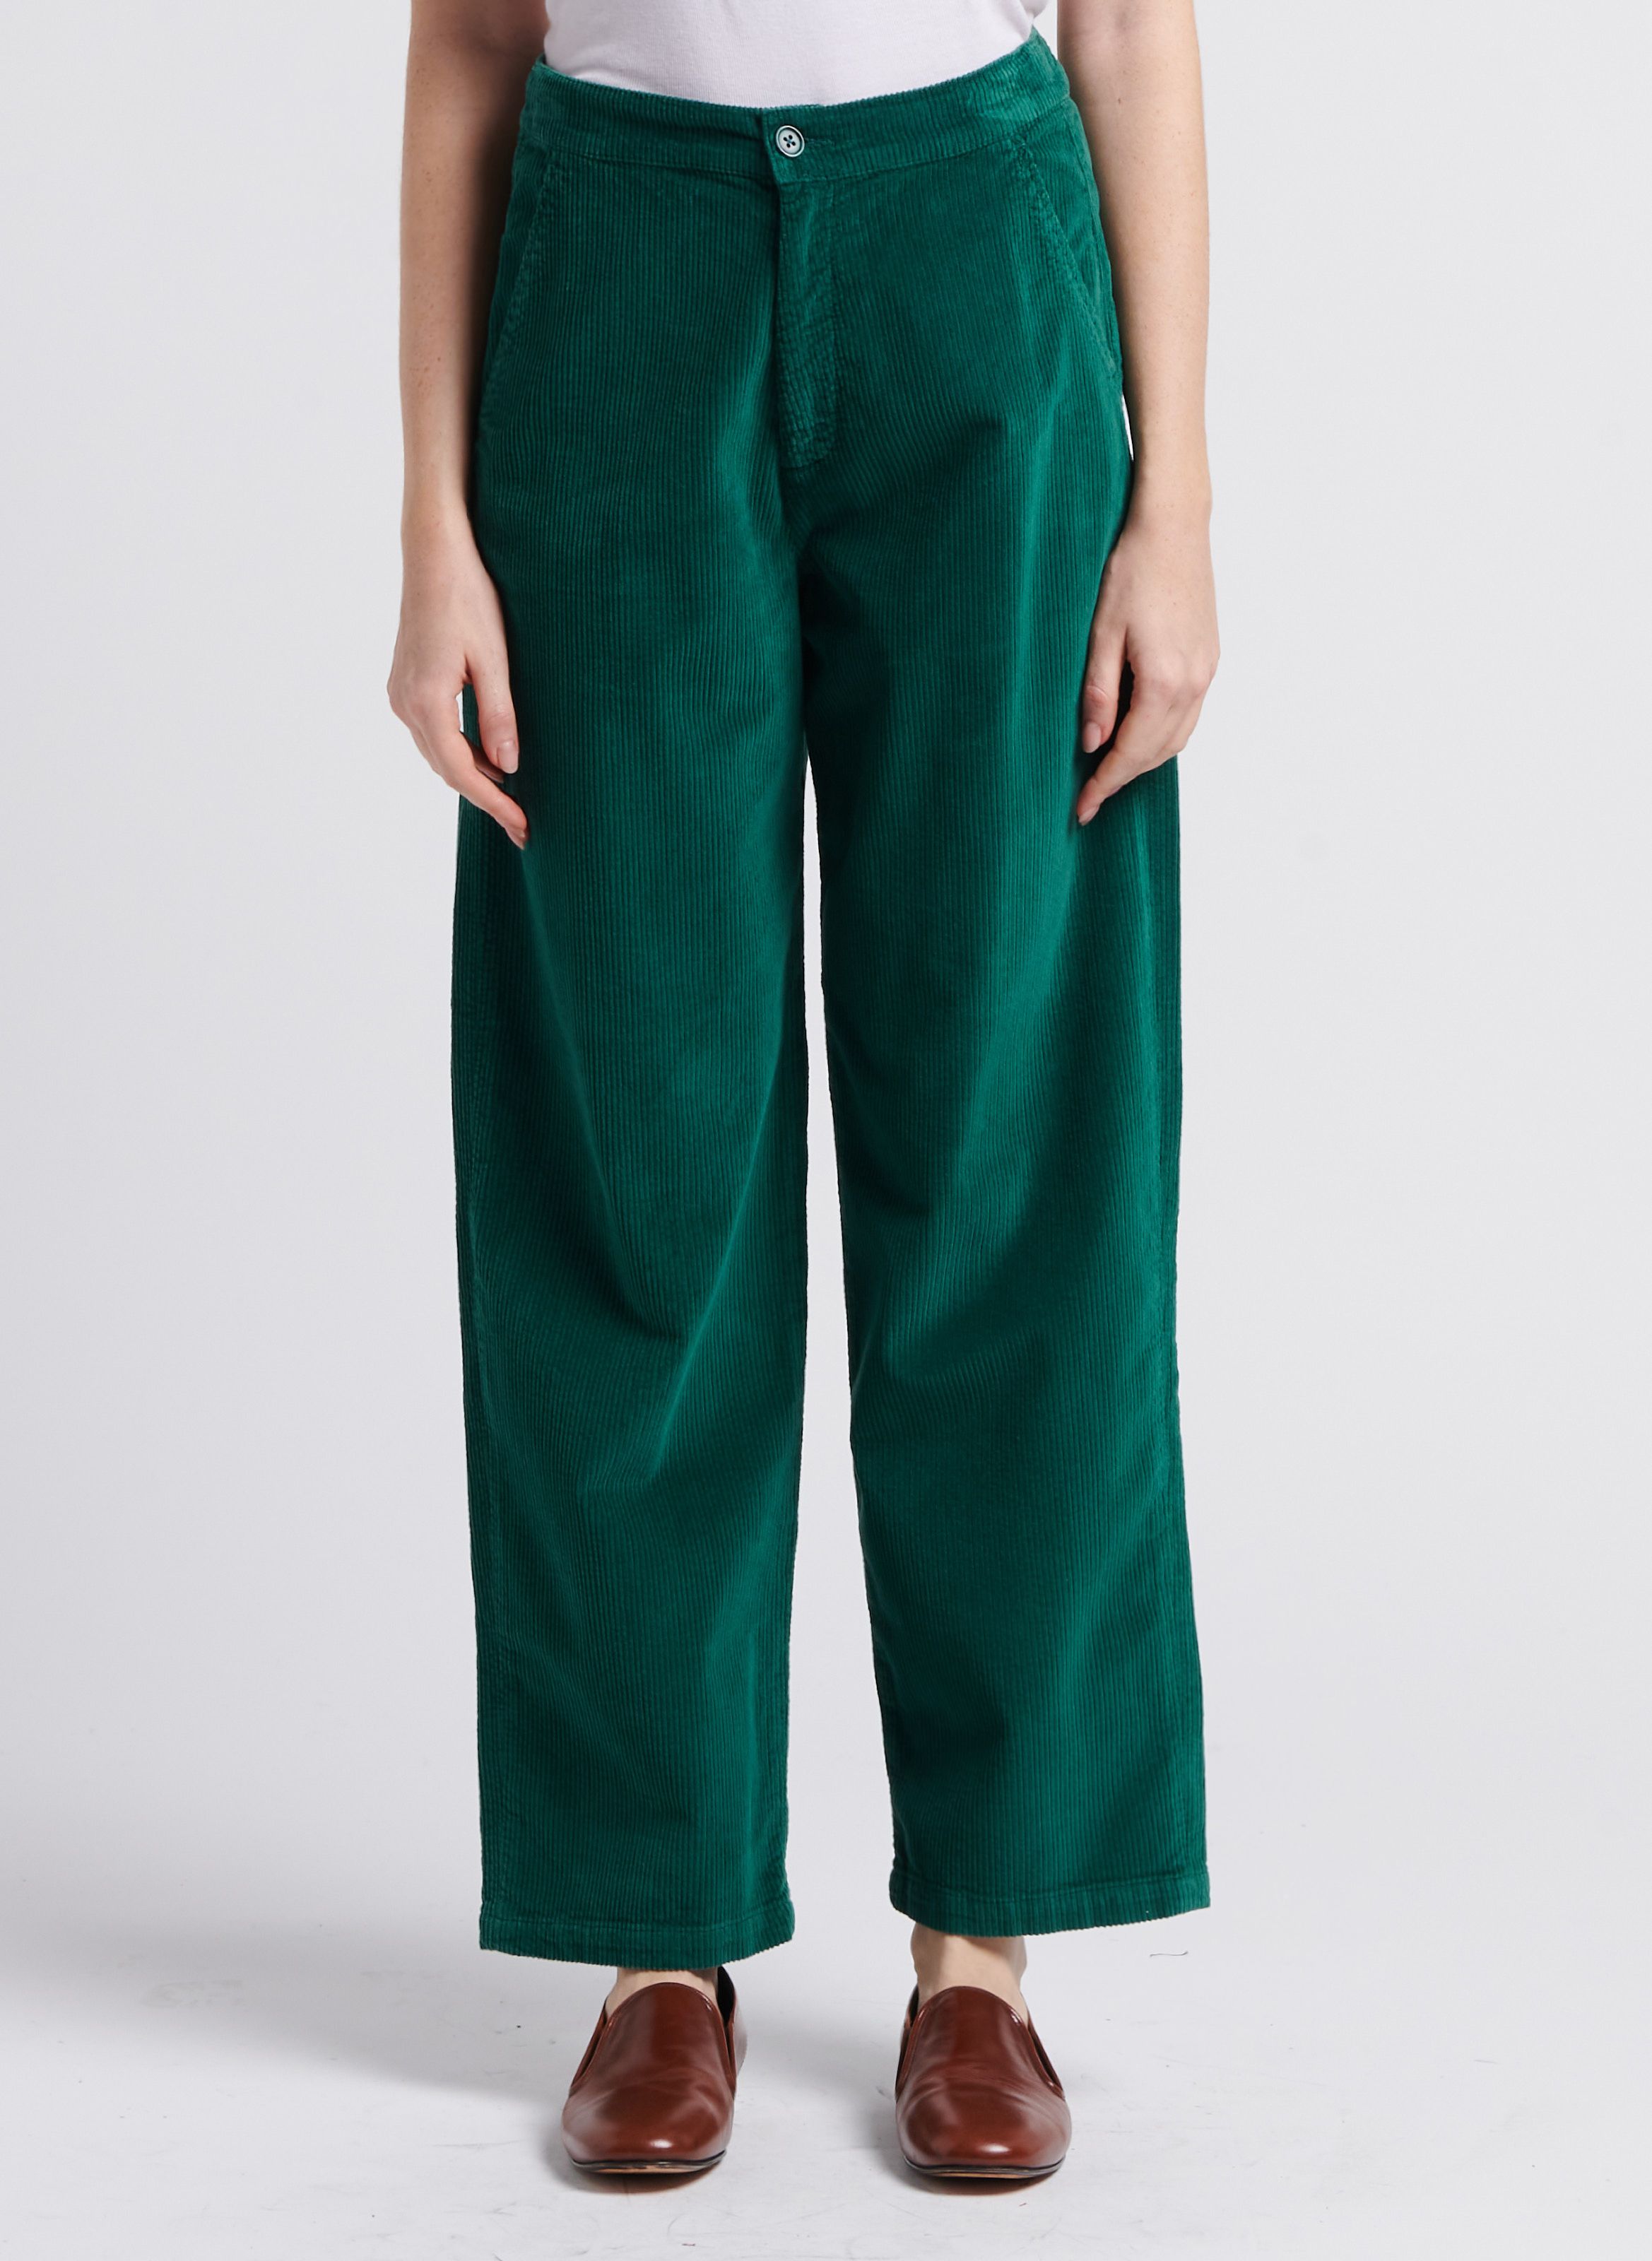 INDEE Corduroy Trousers ONLY Green for girls | NICKIS.com